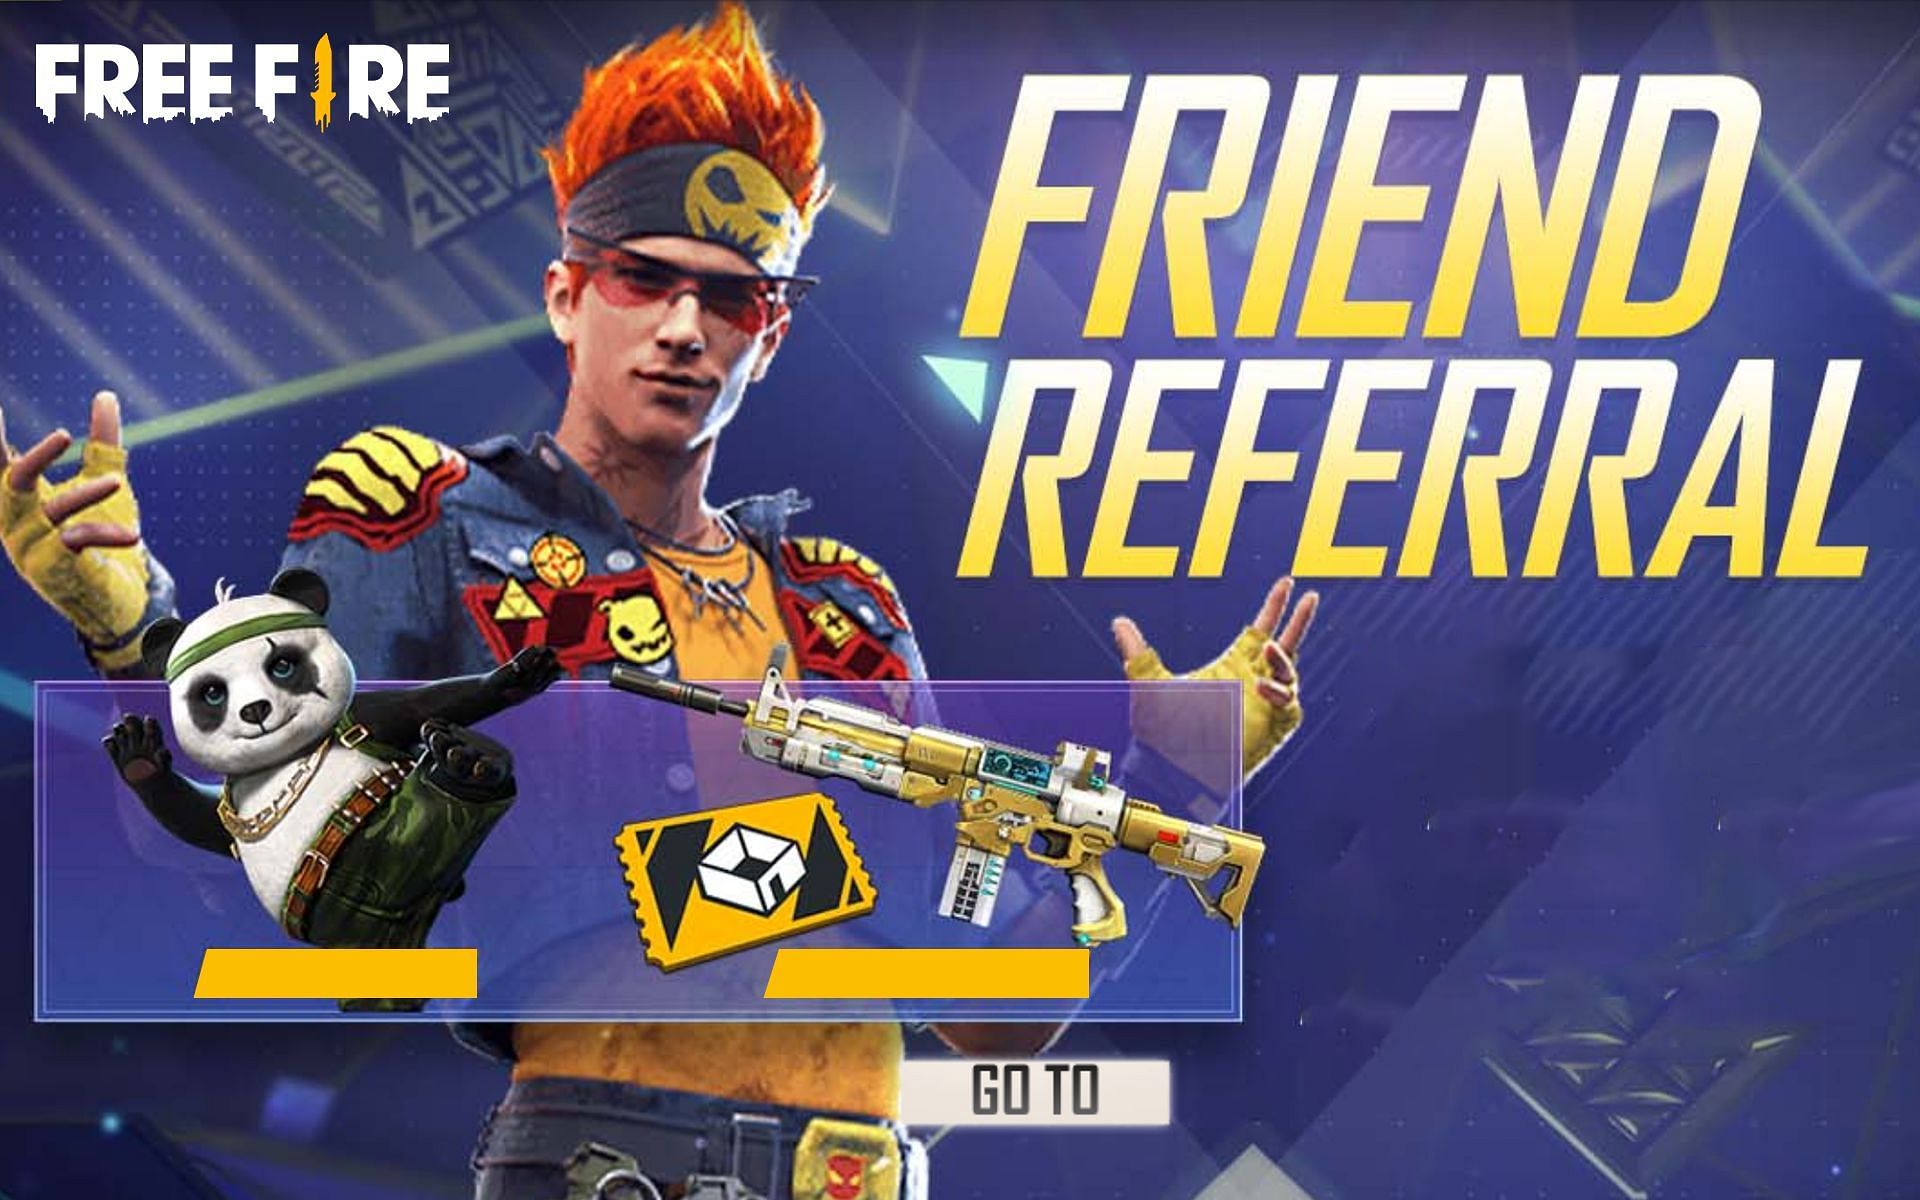 How to play Garena Free Fire with friends